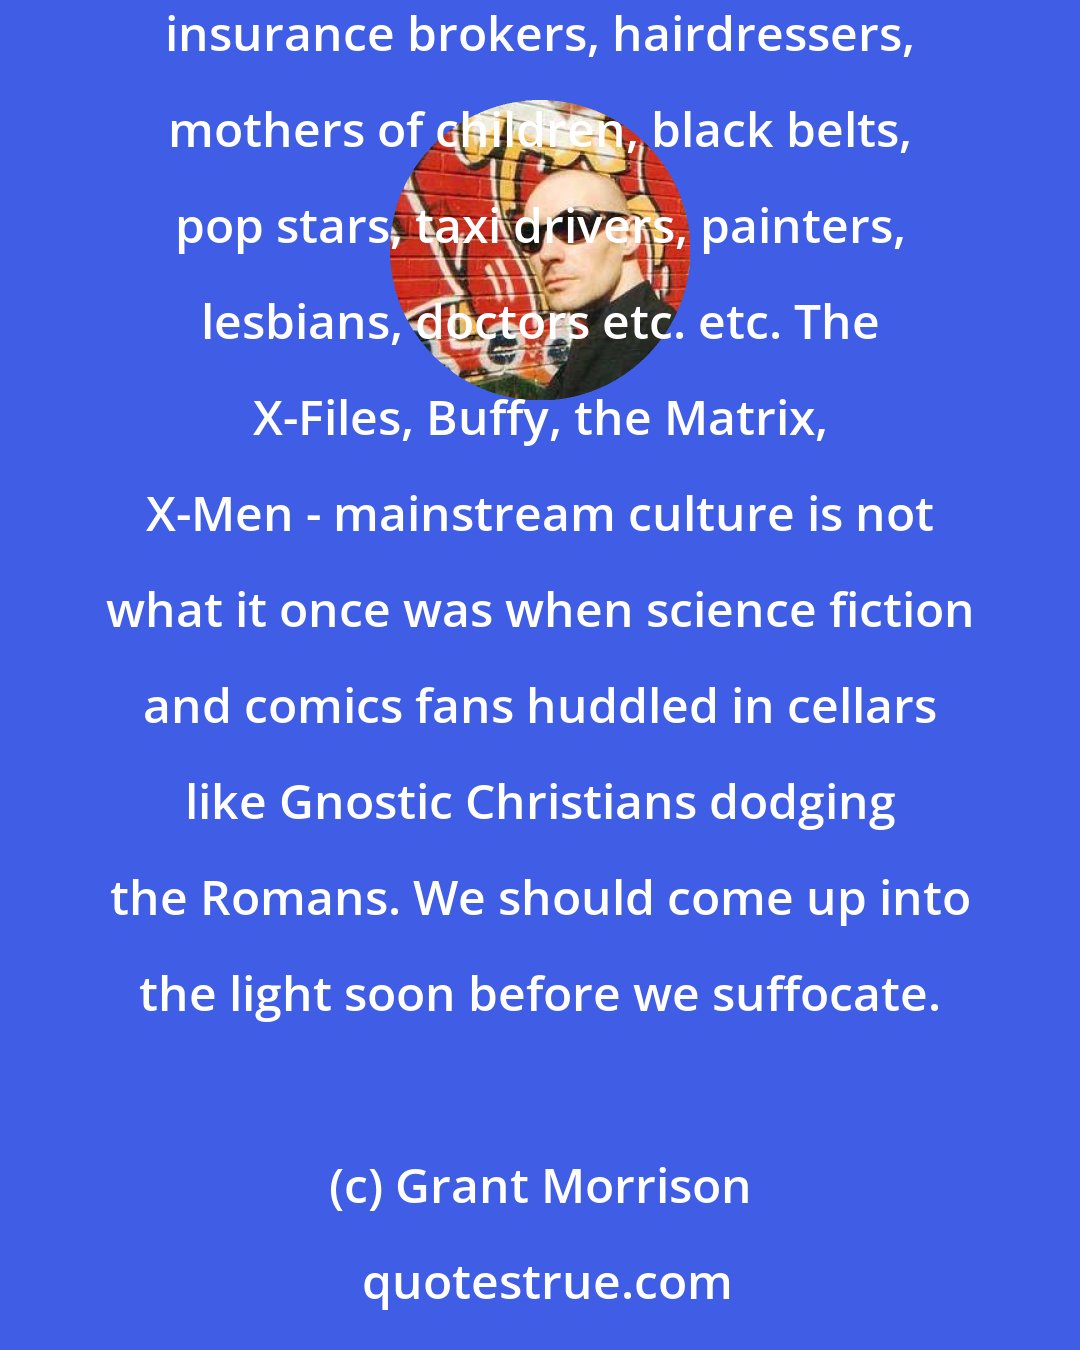 Grant Morrison: The 'medium' is unaware of its attractiveness, that's all. Everyone loves comics. I've proven this to my own satisfaction by handing them out to acountants, insurance brokers, hairdressers, mothers of children, black belts, pop stars, taxi drivers, painters, lesbians, doctors etc. etc. The X-Files, Buffy, the Matrix, X-Men - mainstream culture is not what it once was when science fiction and comics fans huddled in cellars like Gnostic Christians dodging the Romans. We should come up into the light soon before we suffocate.